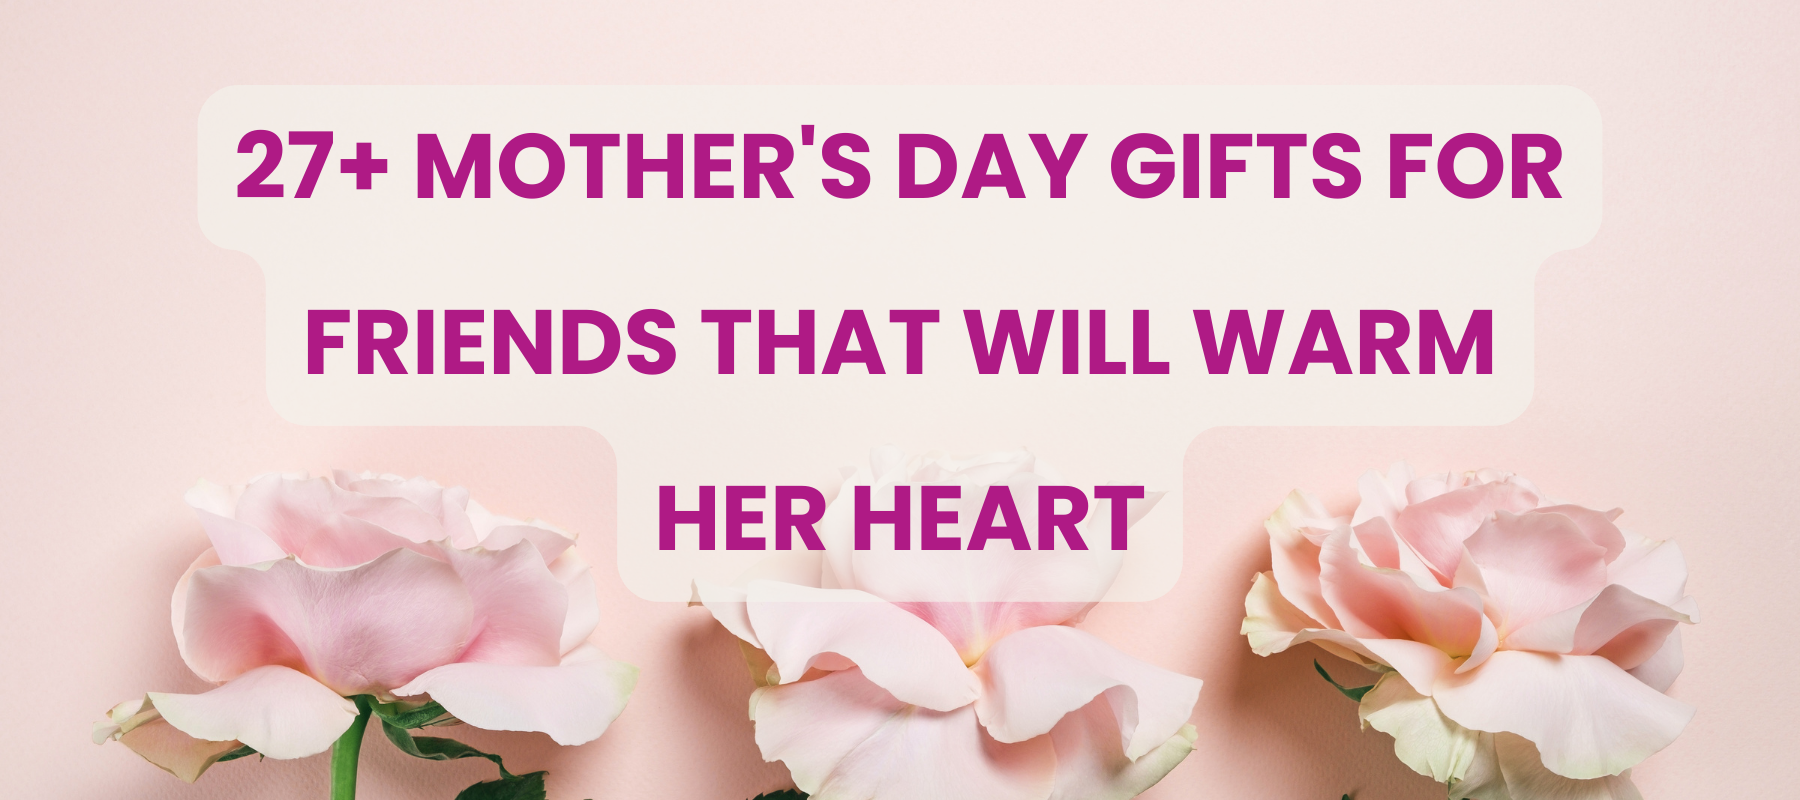 27+ Mother's Day Gifts For Friends That Will Warm Her Heart Unifury